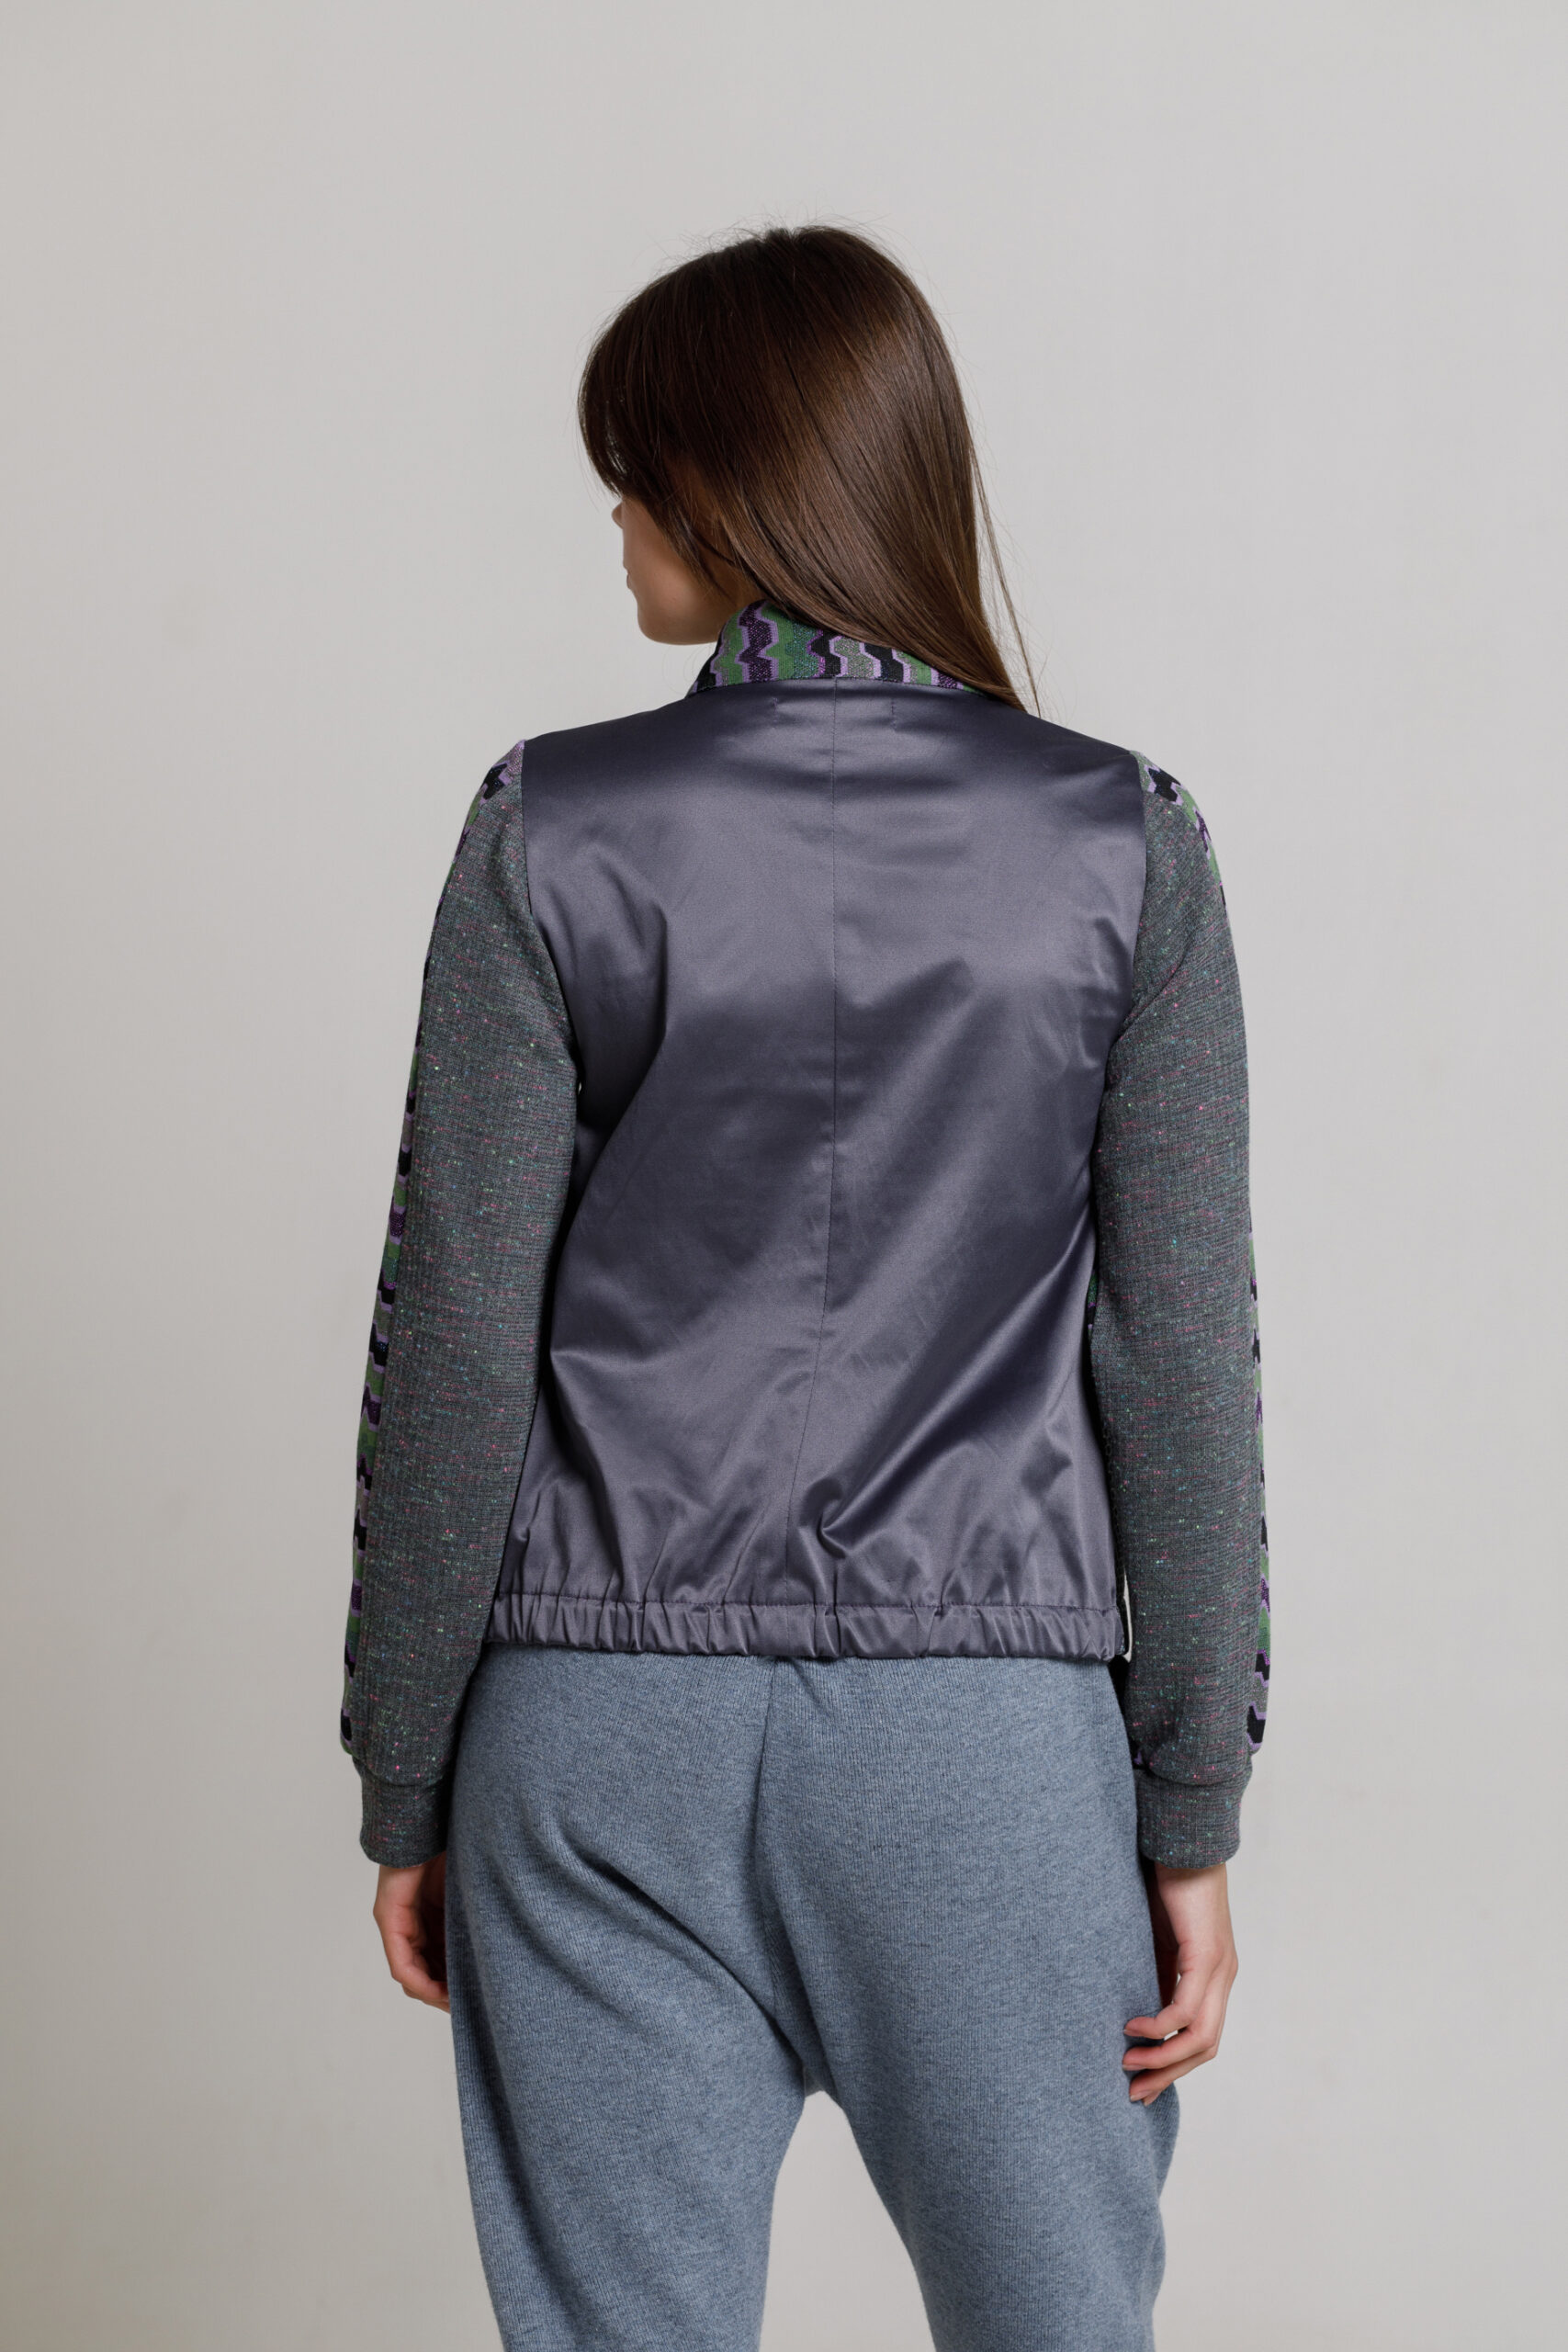 Jacket MAREN in double mesh with scuba, satin trim and jersey. Natural fabrics, original design, handmade embroidery